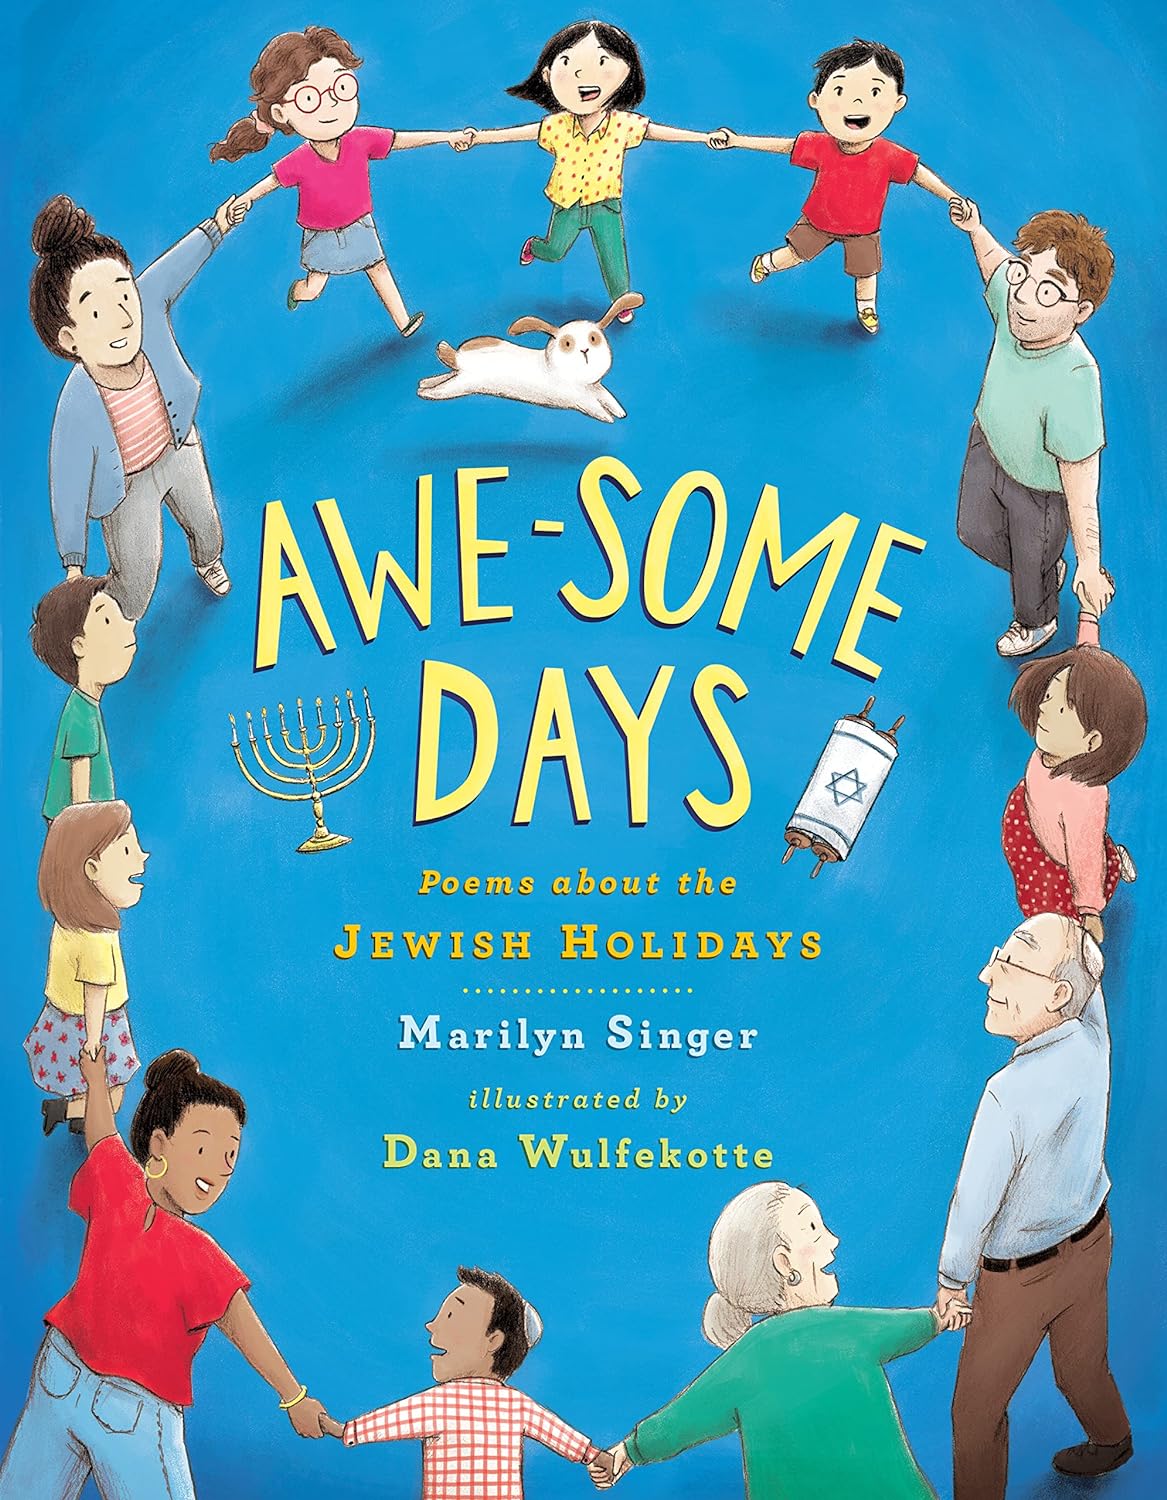 Awesome Days: Poems About Jewish Holidays